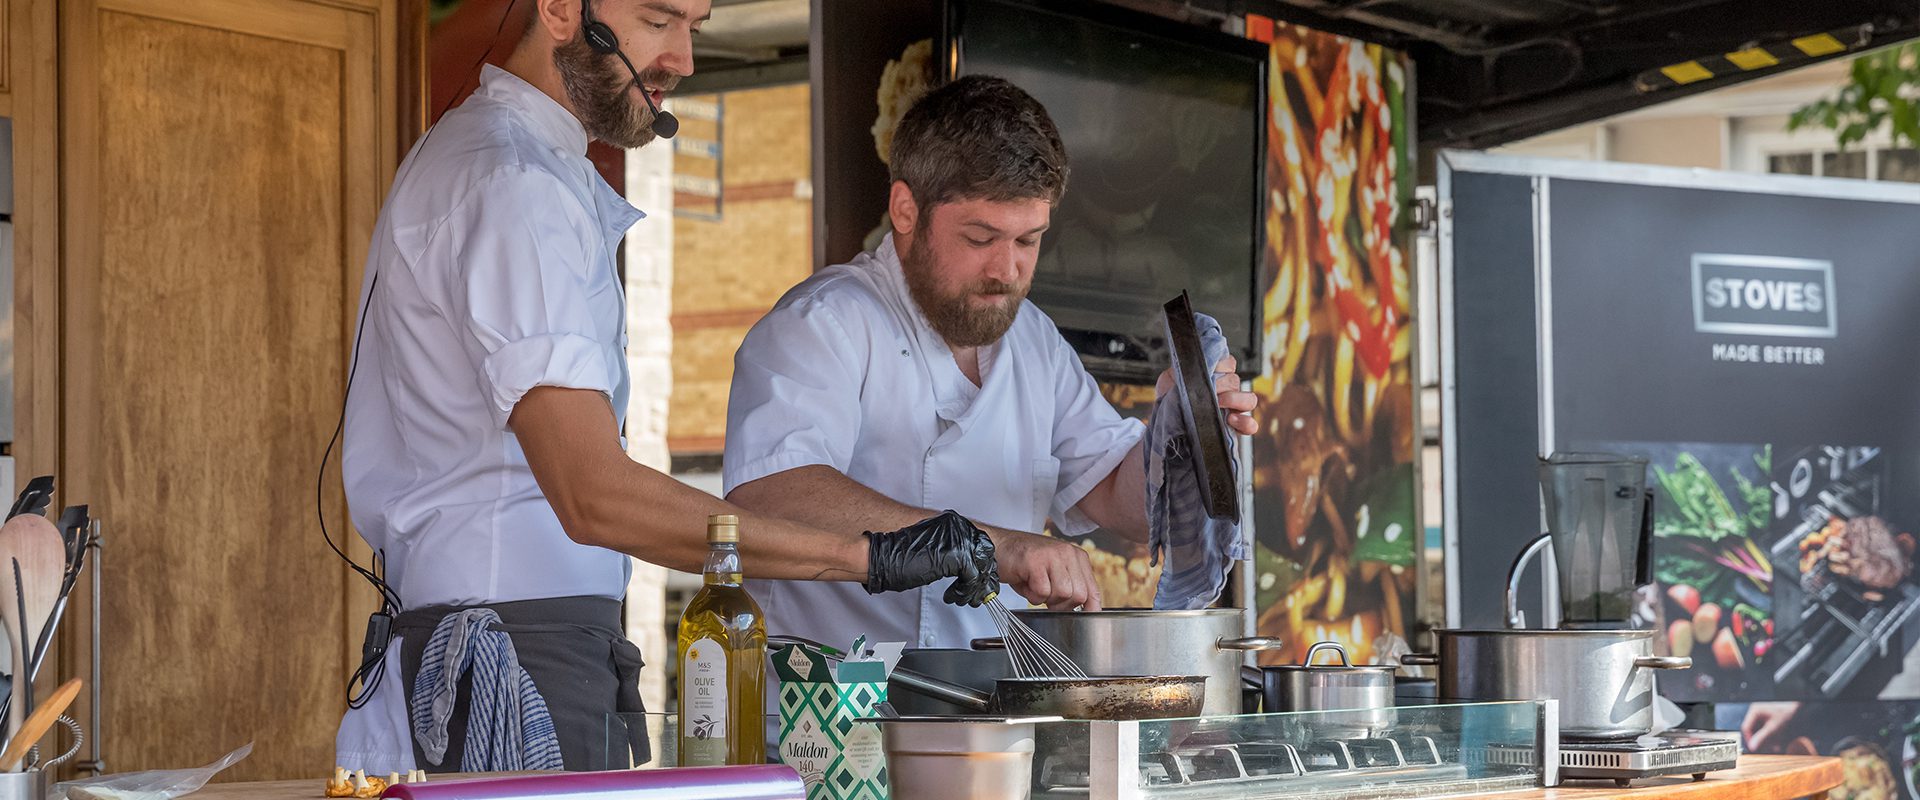 two men are doing a cooking demonstration